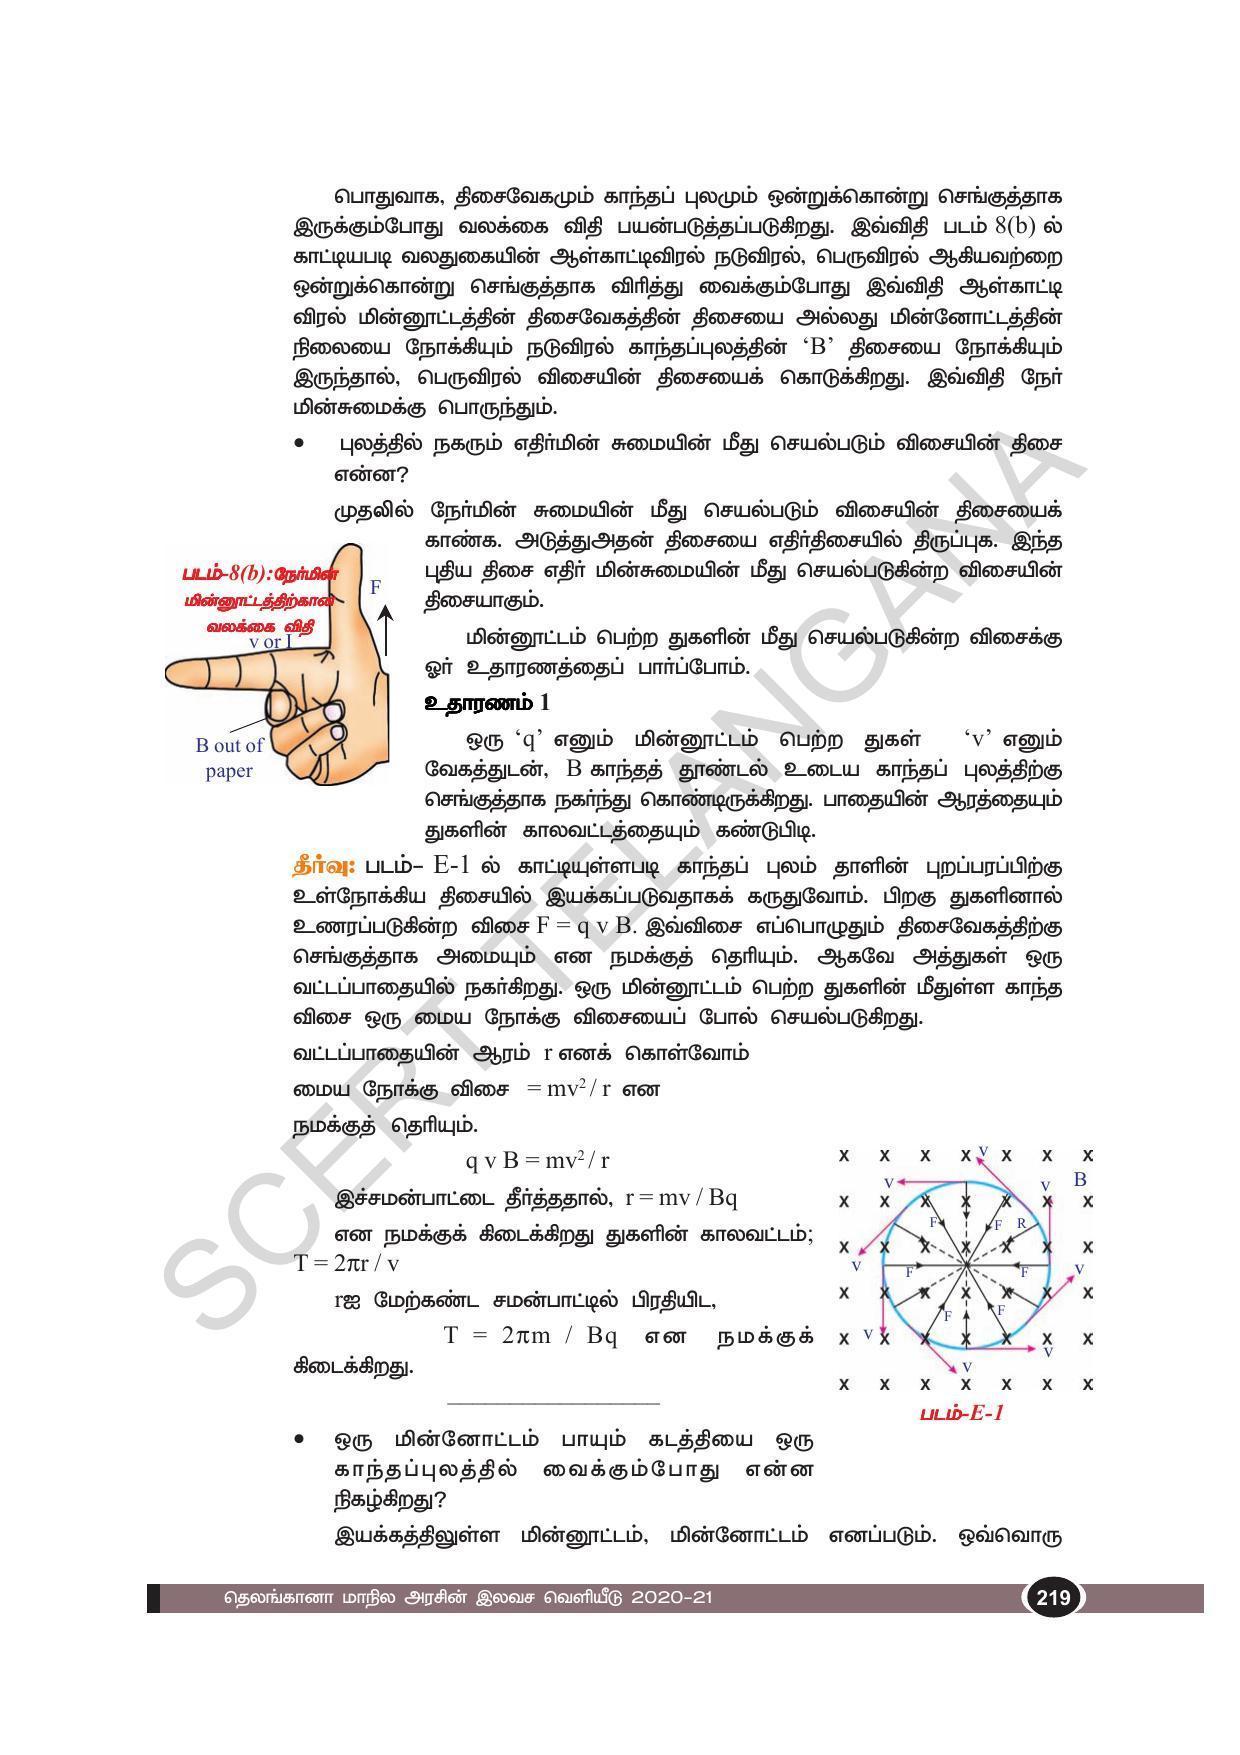 TS SCERT Class 10 Physical Science(Tamil Medium) Text Book - Page 231